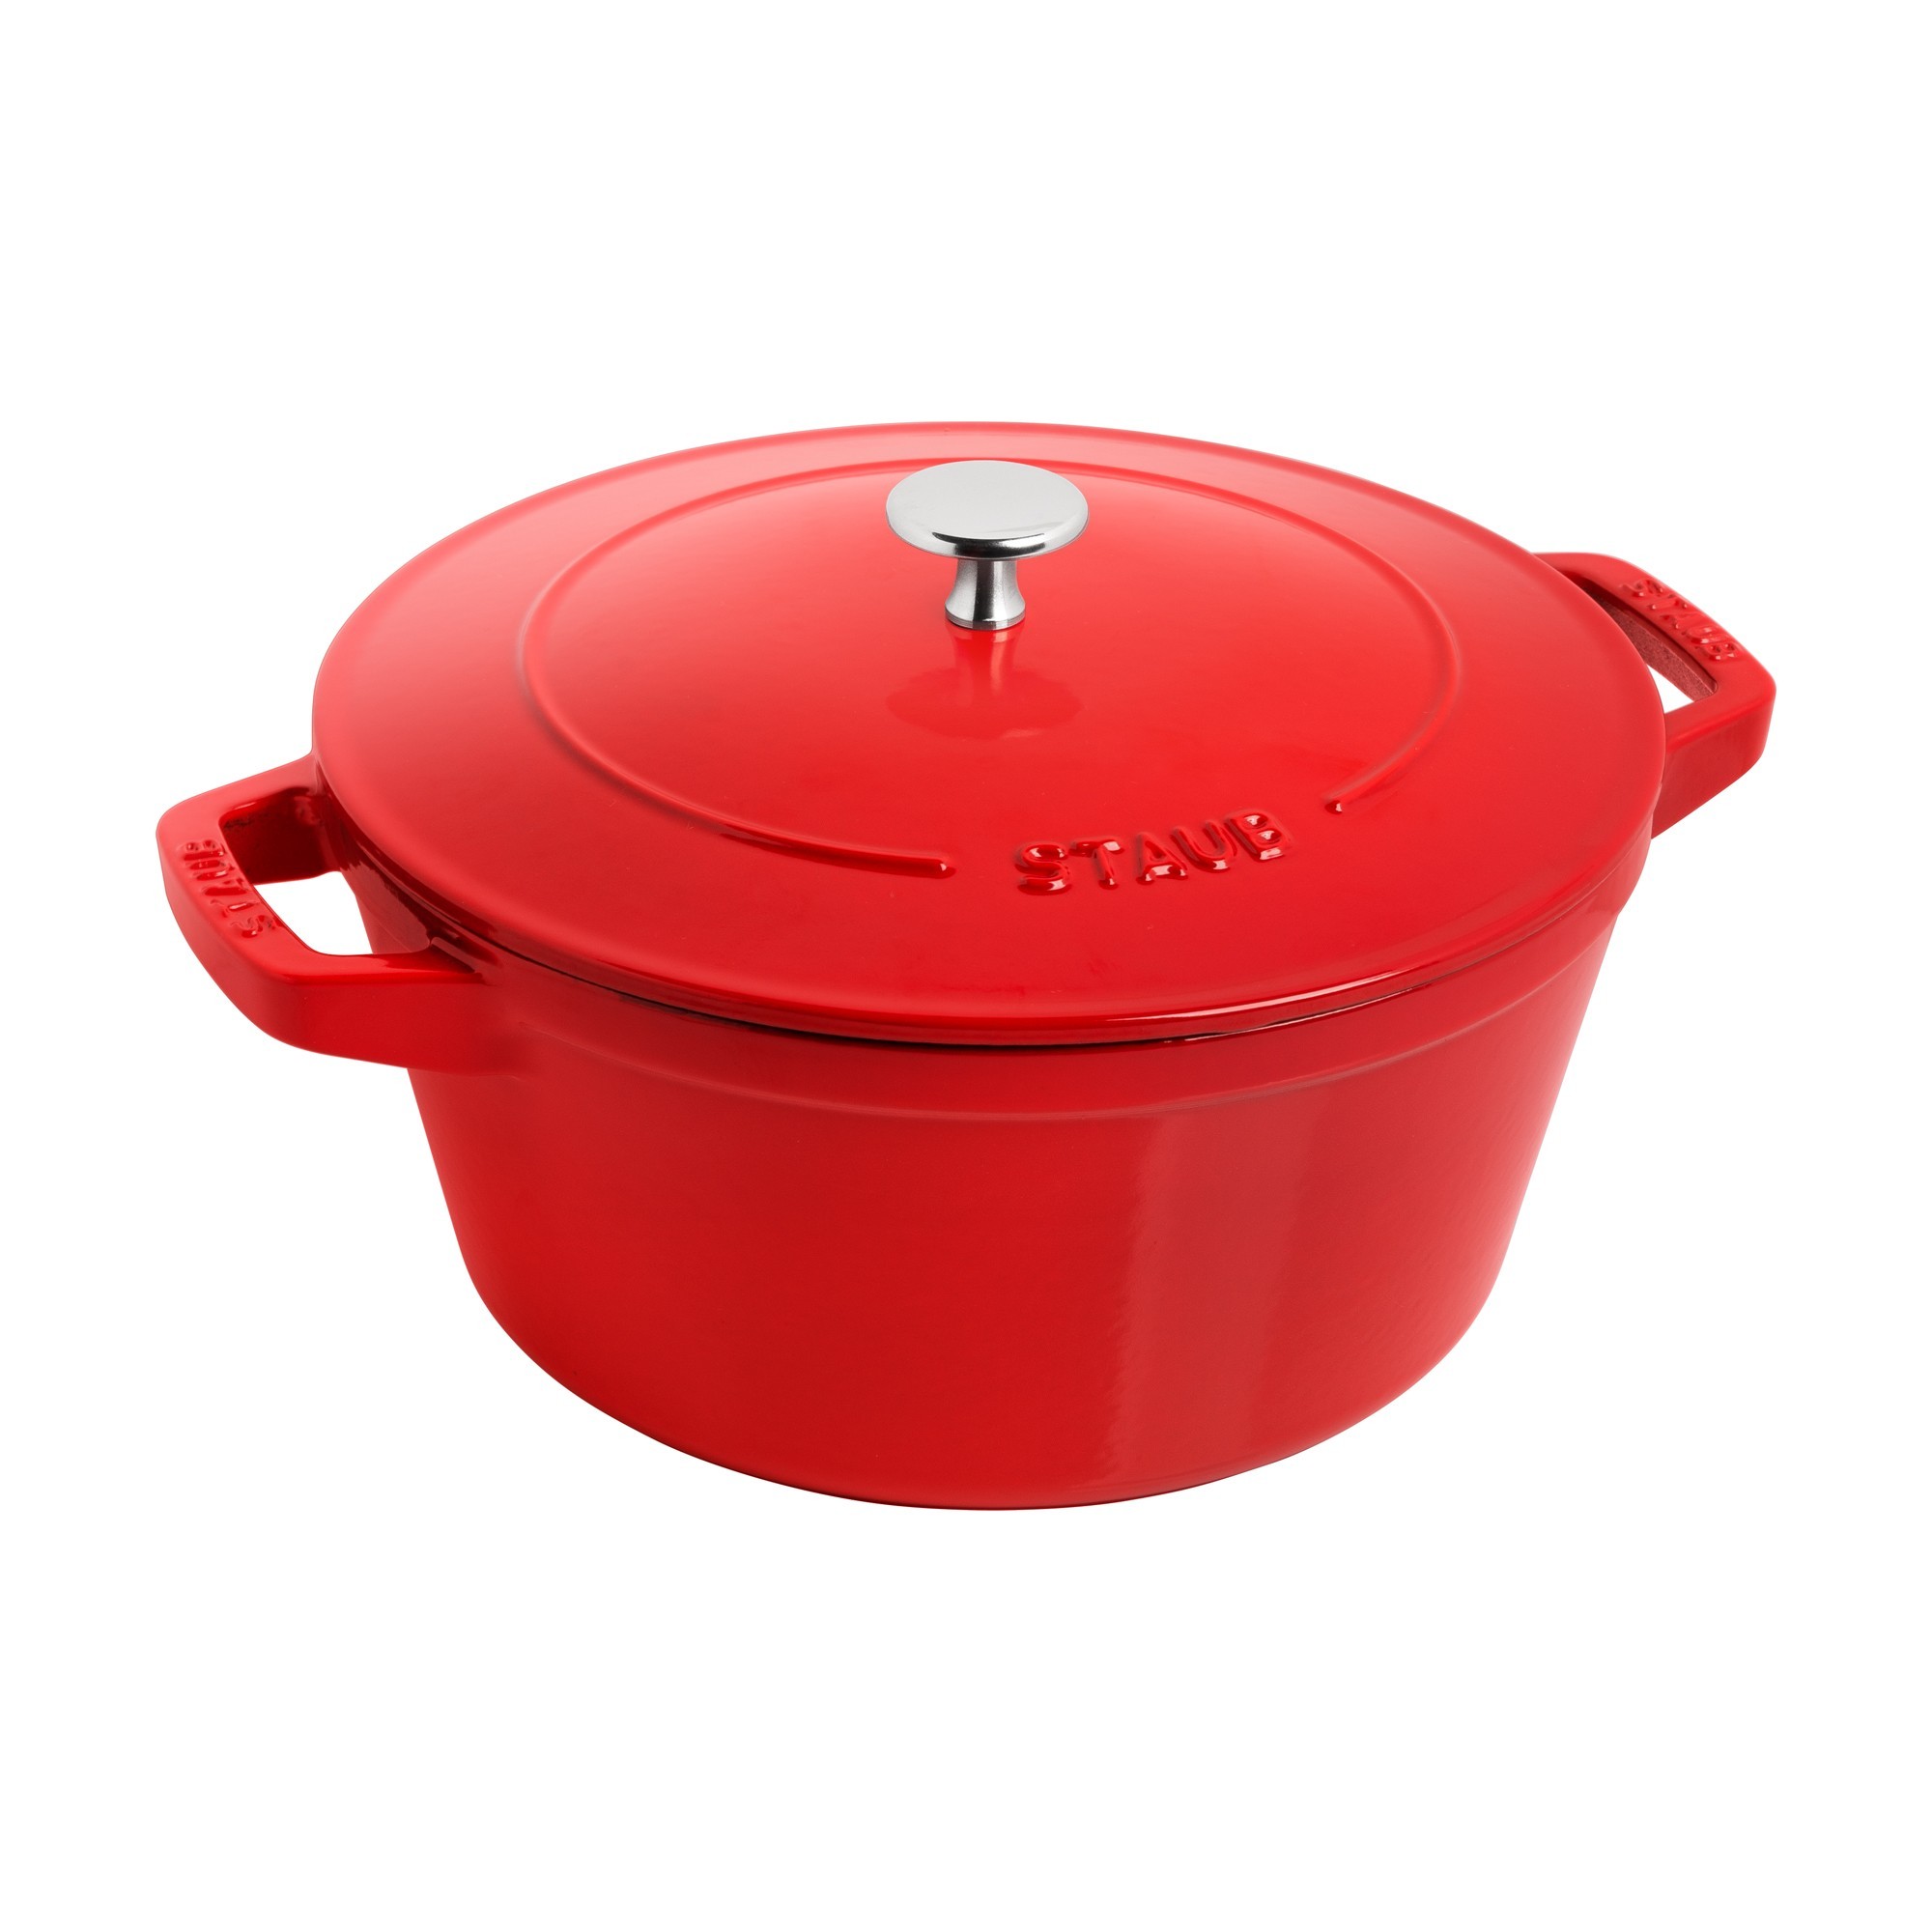 Cast iron Cocotte cooking pot, with steam cooking accessory, 24cm/3.79L,  Cherry - Staub